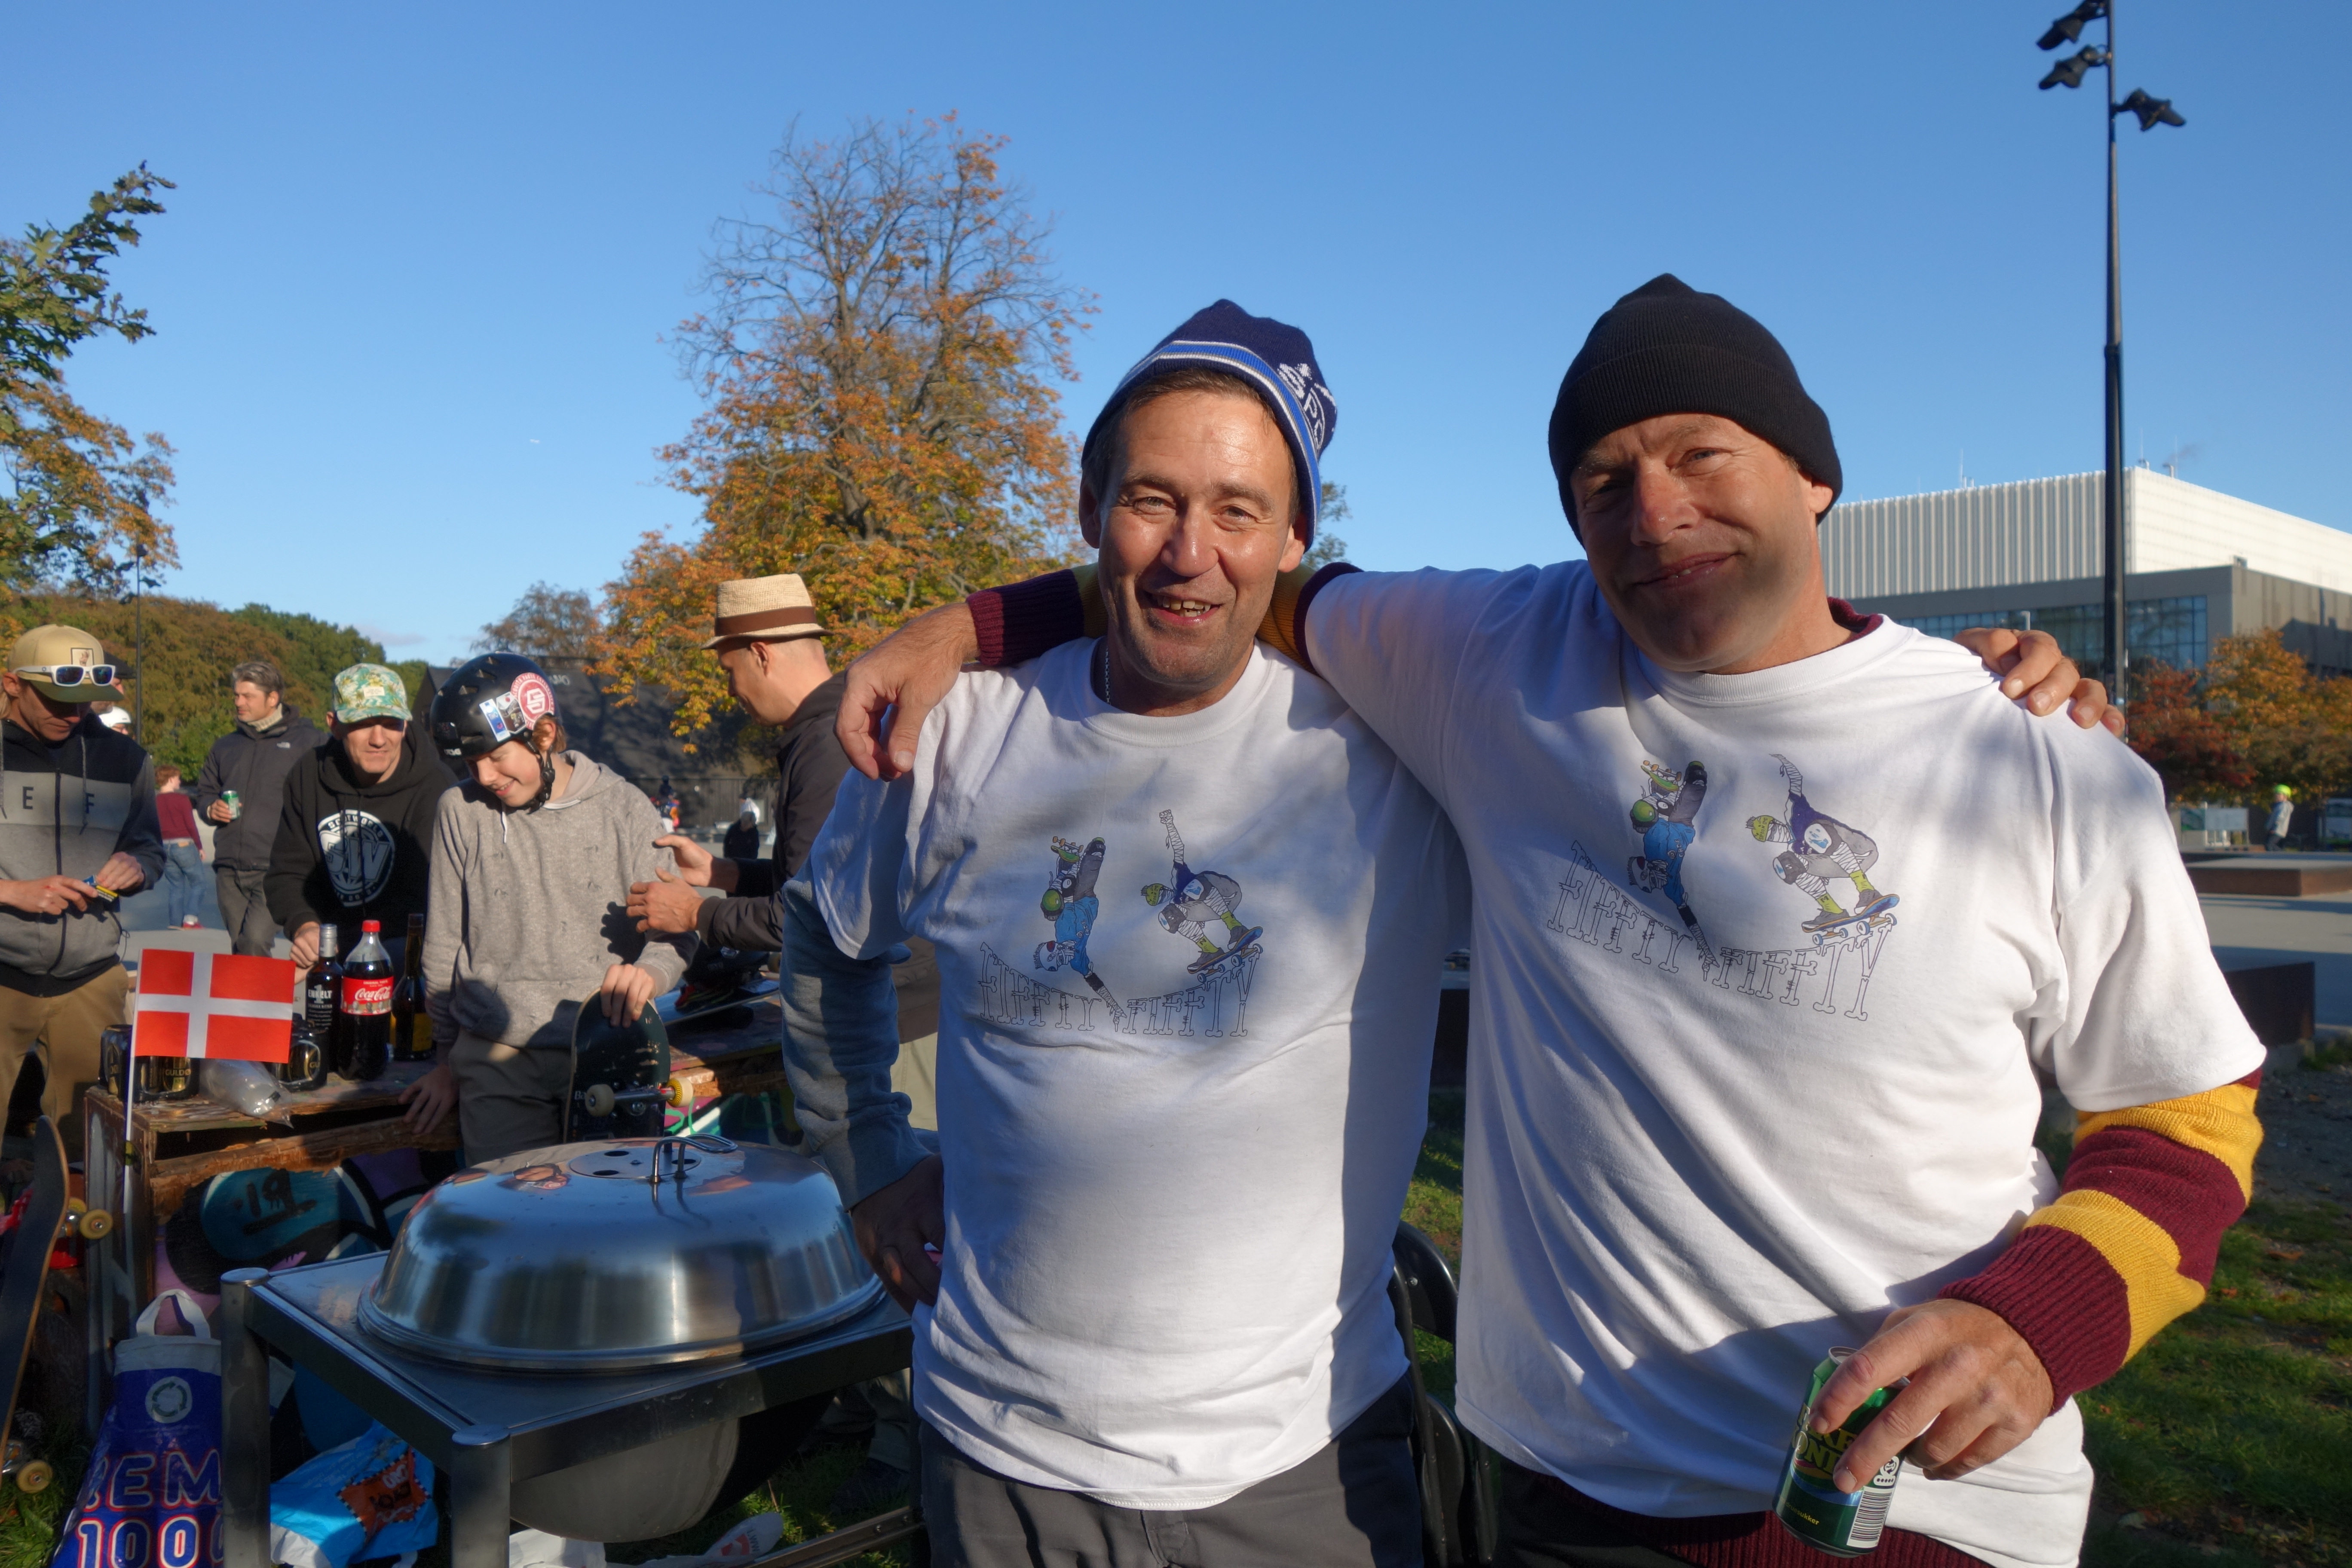 HAPPY BIRTHDAY NYMAND & FINN D ! What a honor & what a respect, still skateboarding at the age of 50, still going hard as we like !! This is a tribute post and some pics from a great day in Fælledparken. 50-50 PARTY !! and yes, how many do you know that can claim that ? …. 